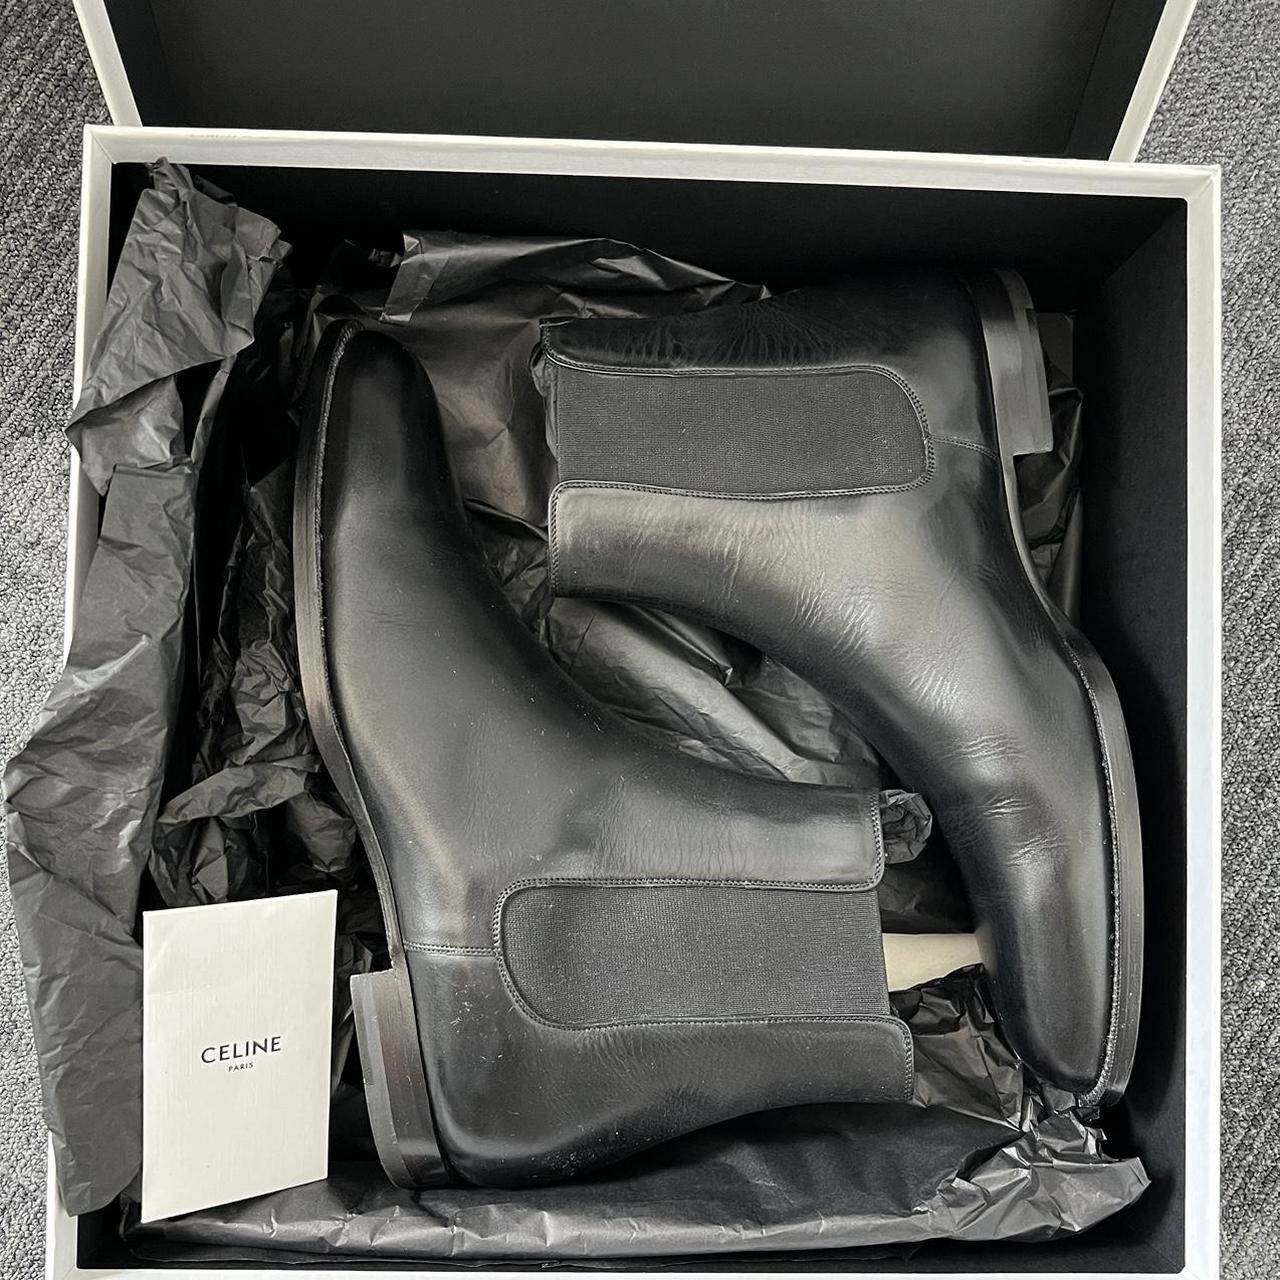 Celine Boots Hedi Slimane. With box and shoes bags.... - Depop